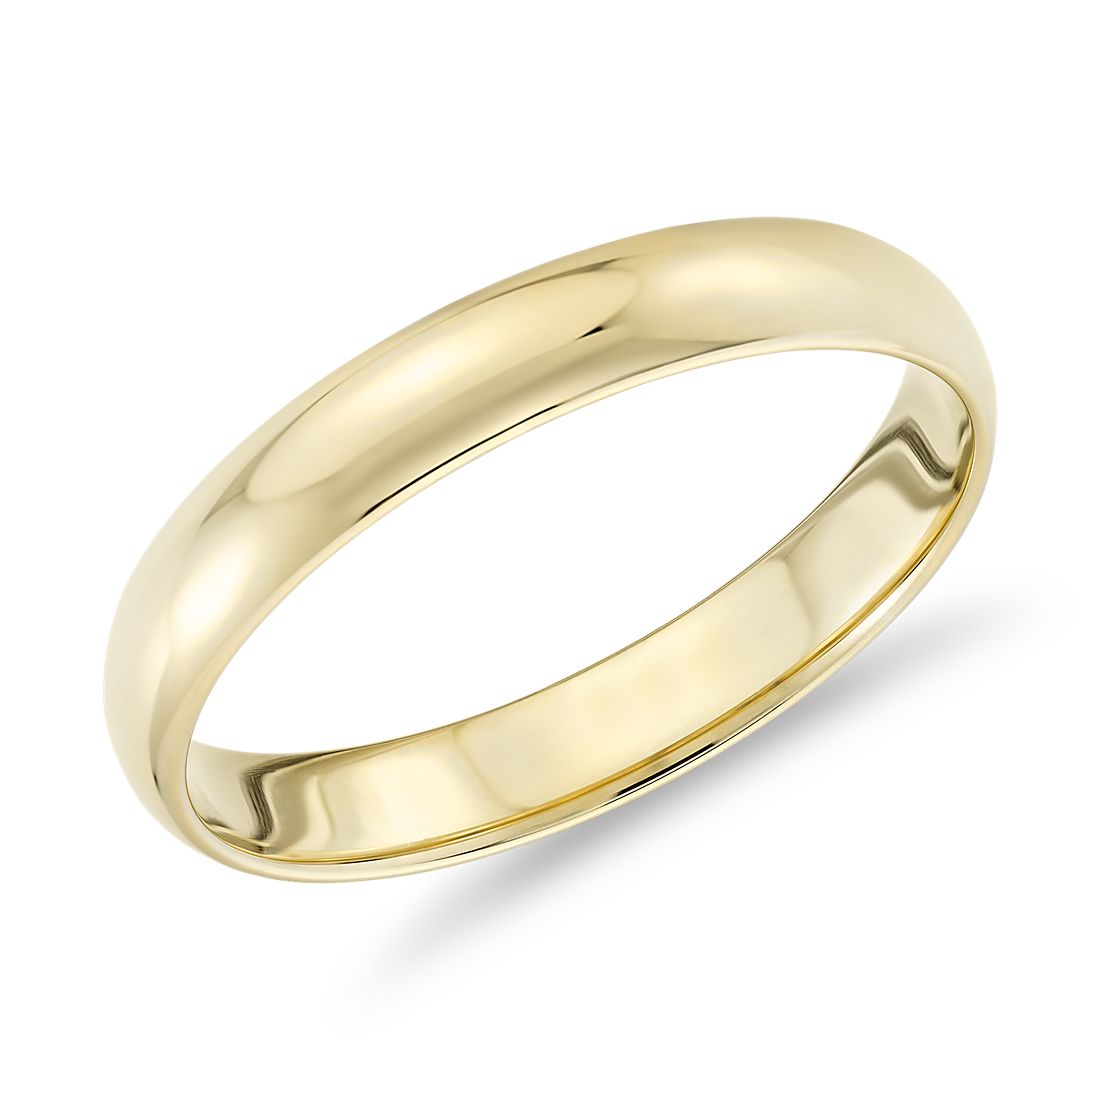 SIZE 4-13 14KT GOLD EP UNISEX 3MM SMOOTH  WEDDING BAND RING 